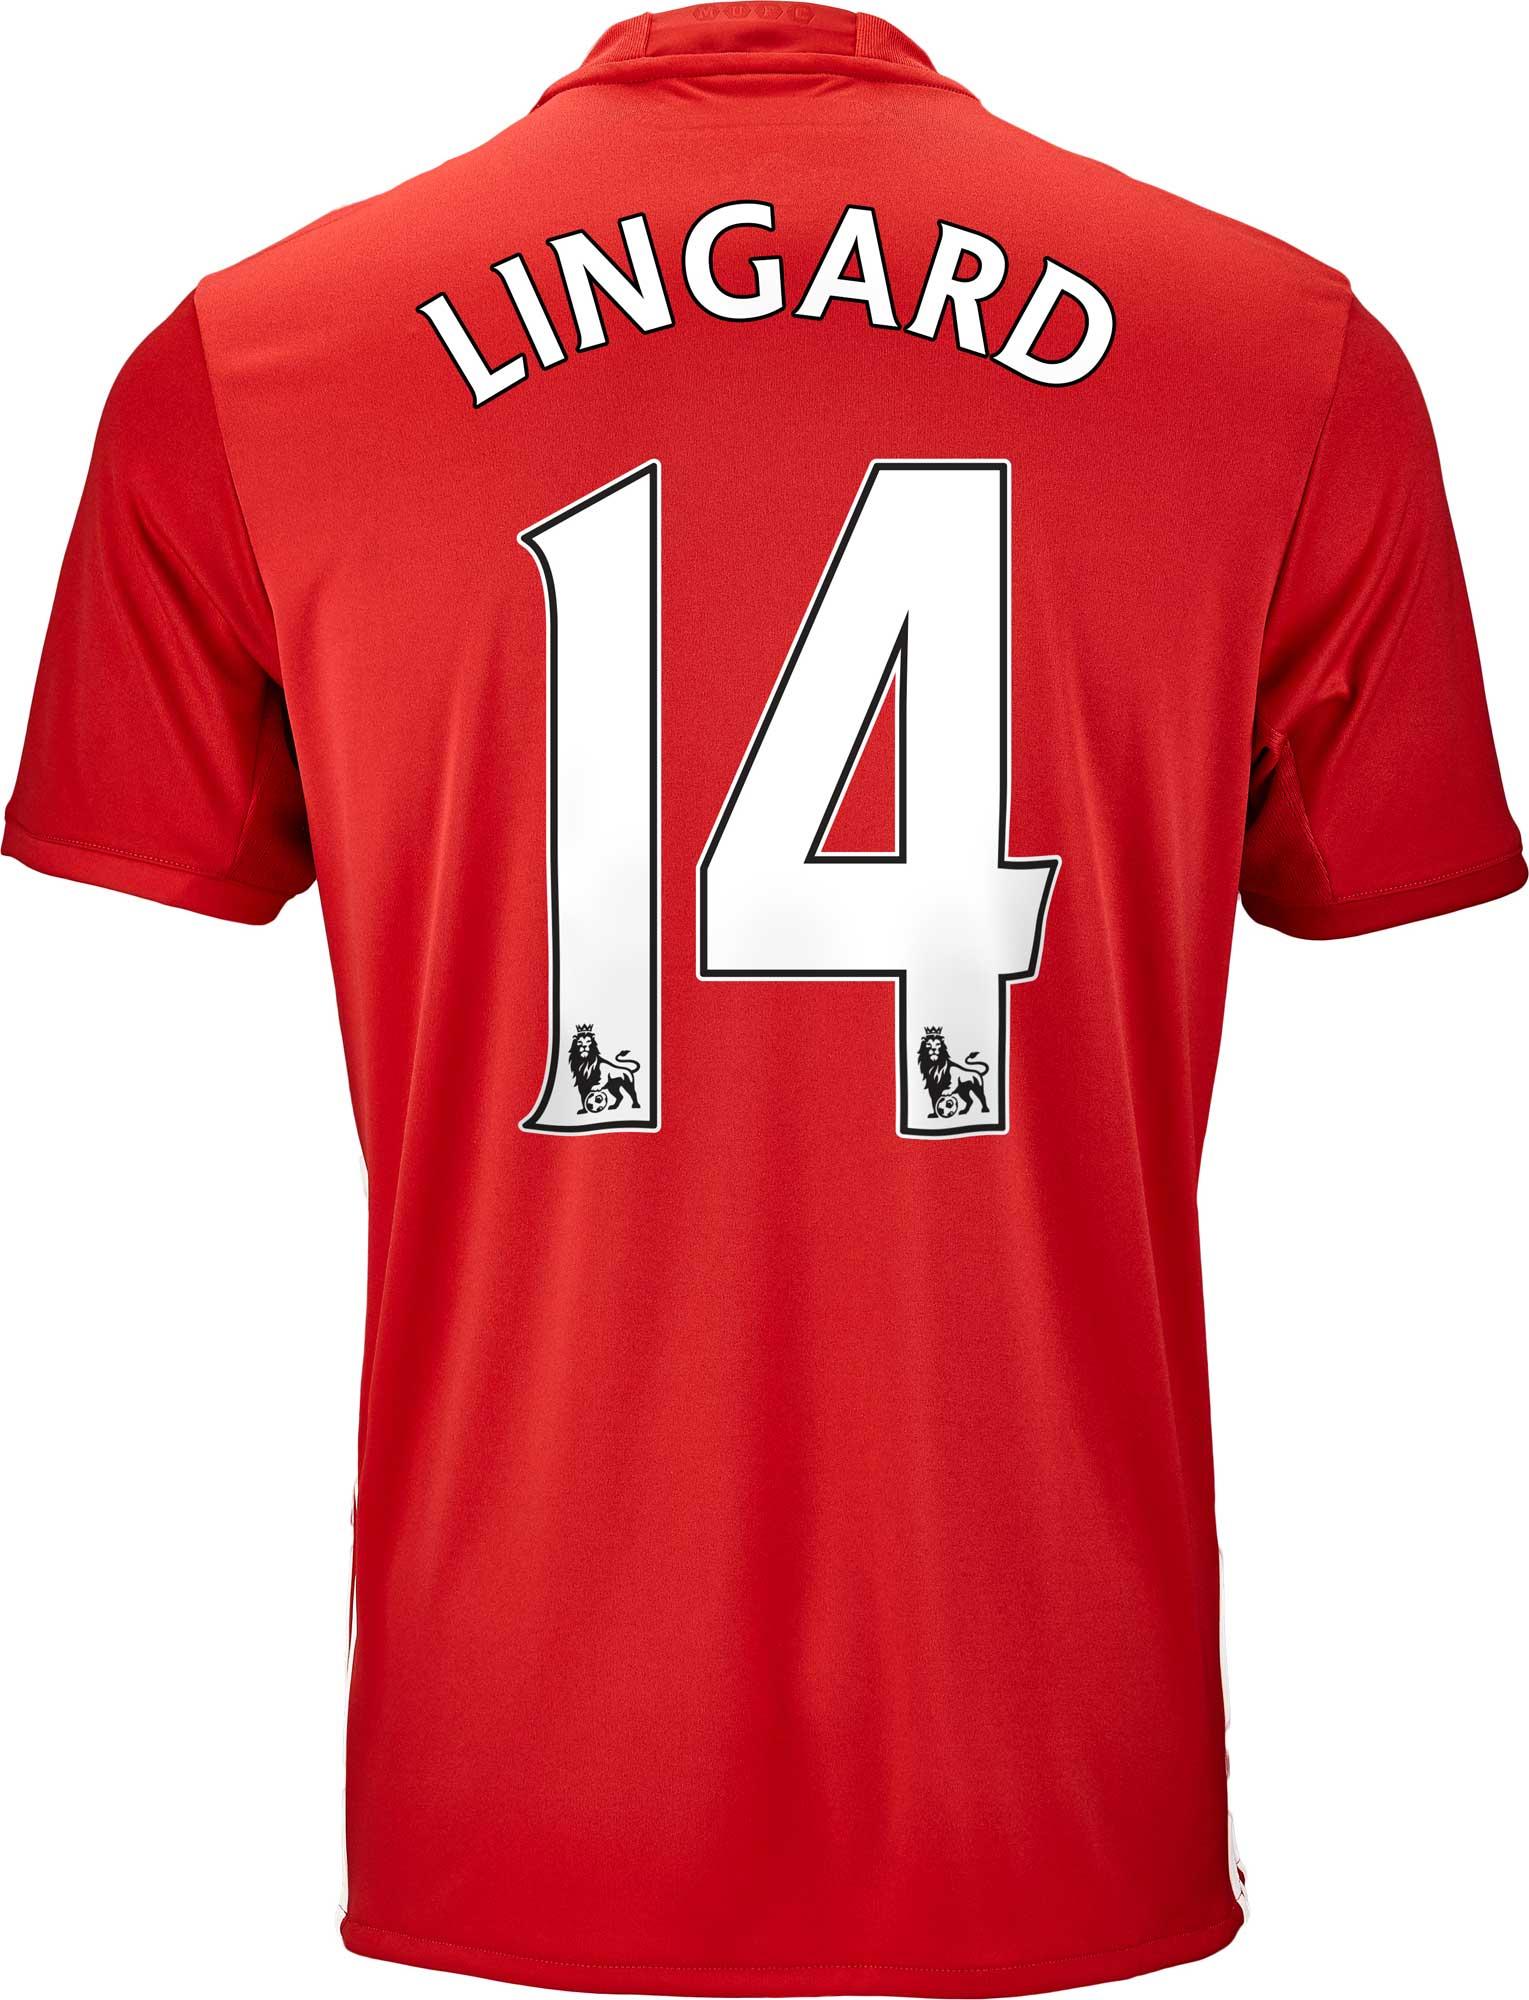 manchester united lingard jersey